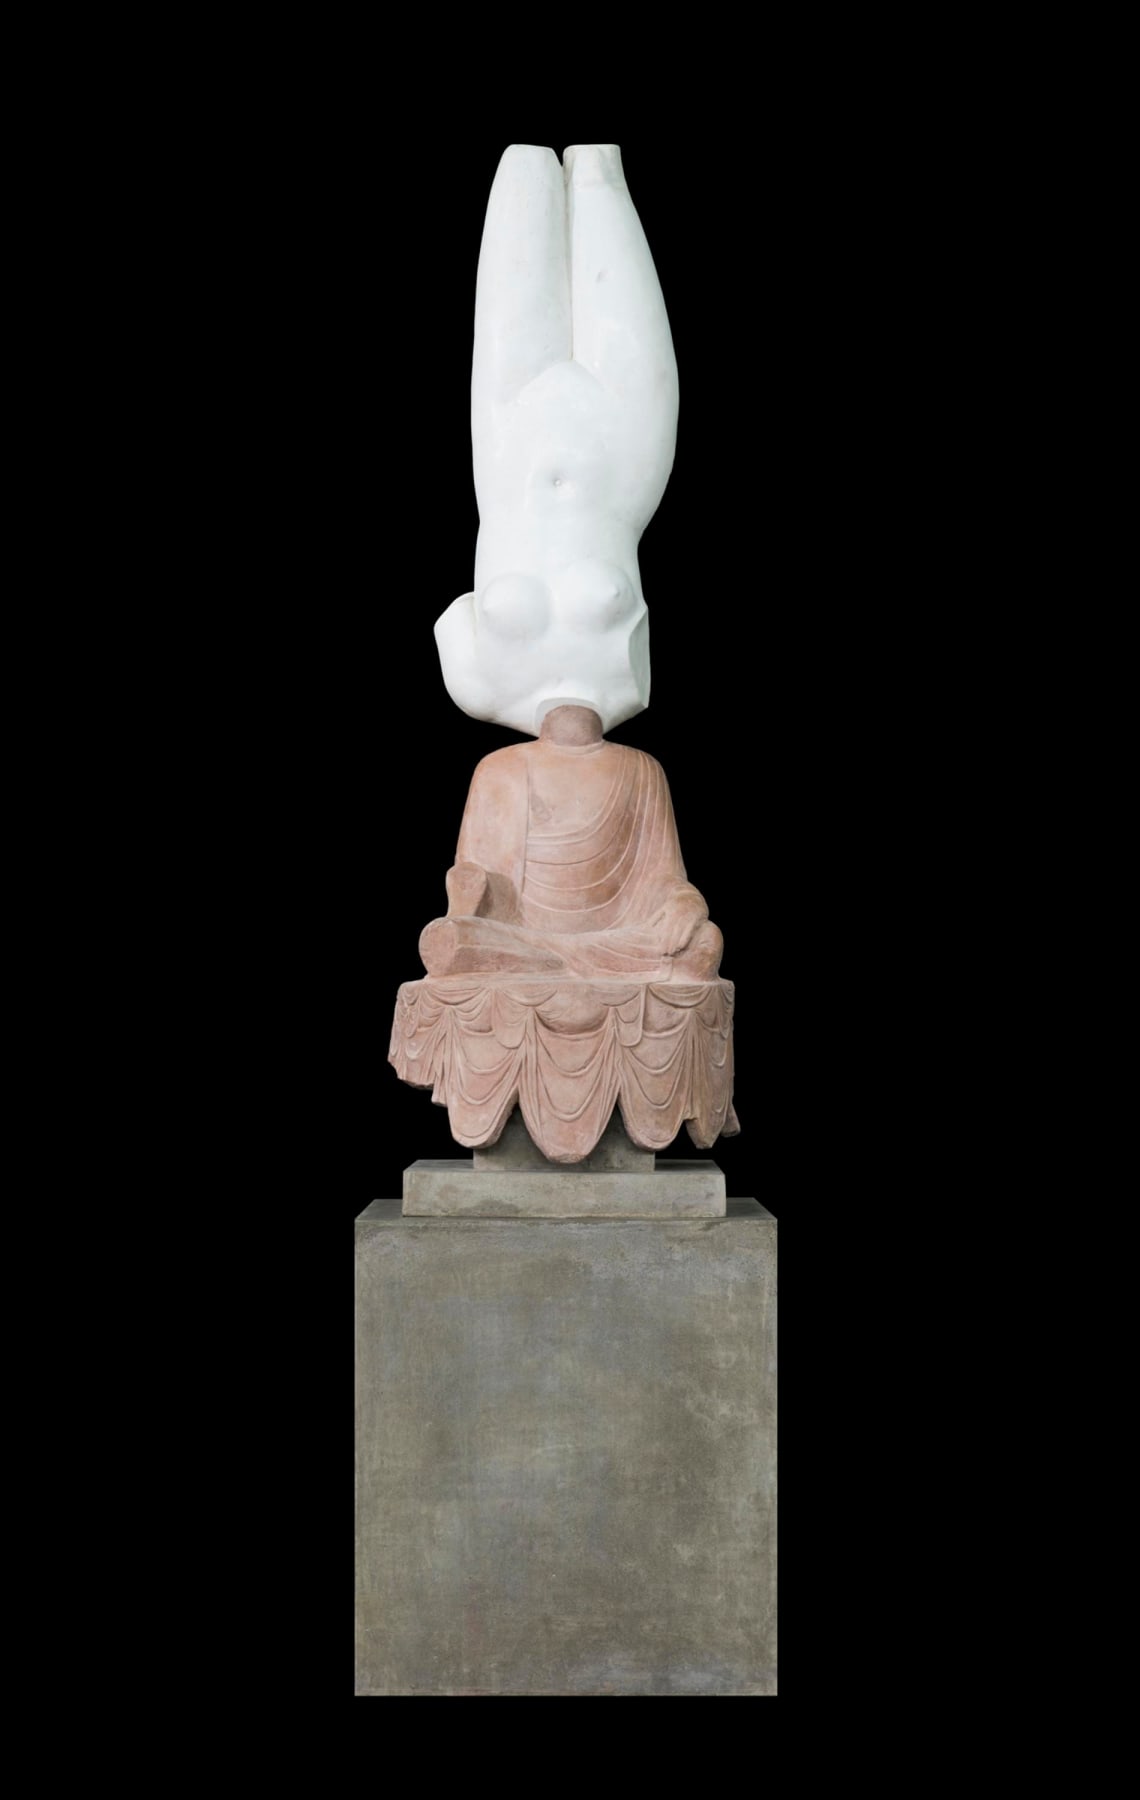 Greek marble sculpture upside down connected to the statue of a Buddha via the neck